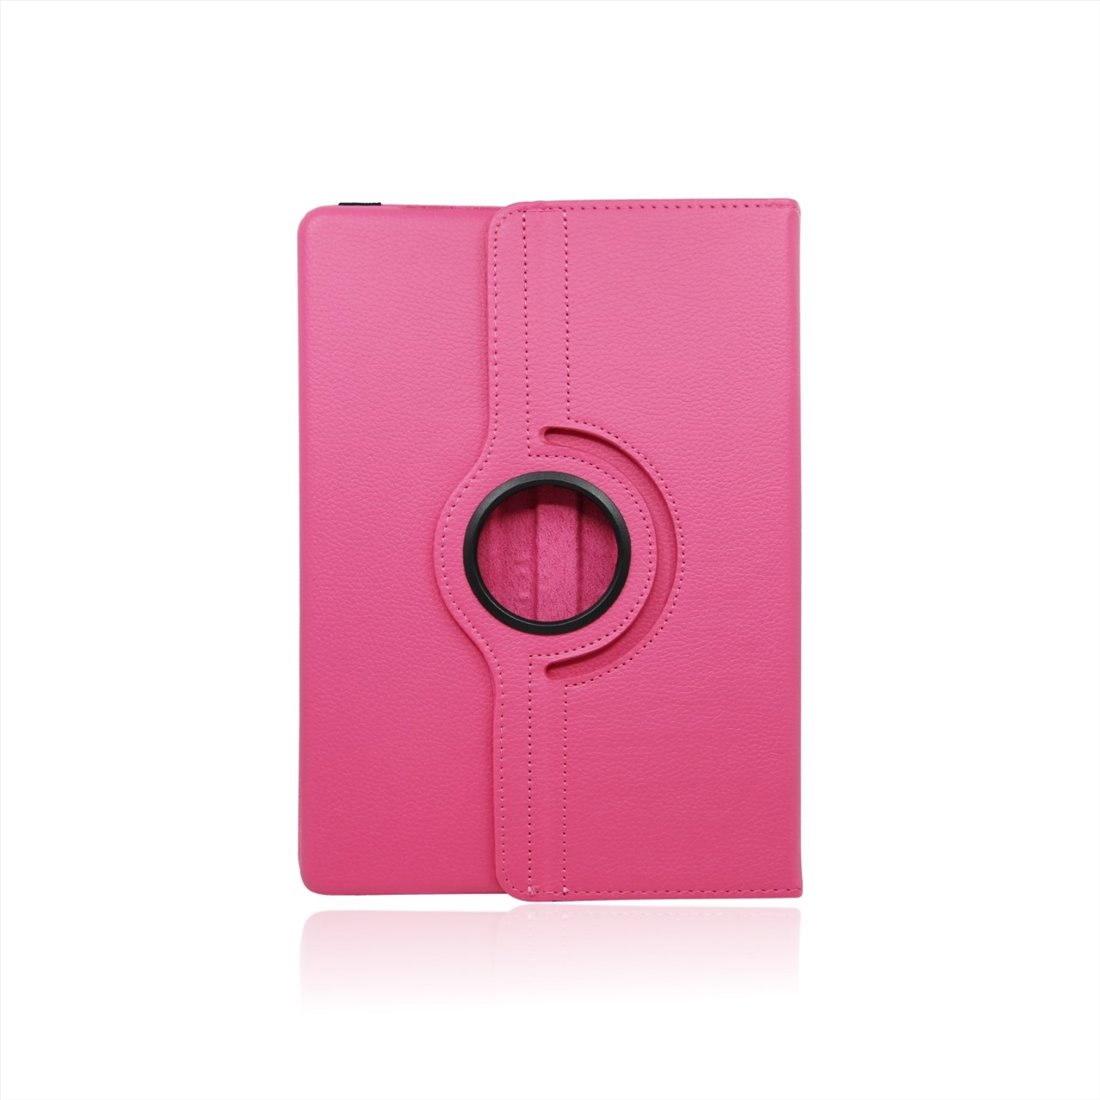 Apple iPad 2/3 artificial leather Pink Book Case Tablet